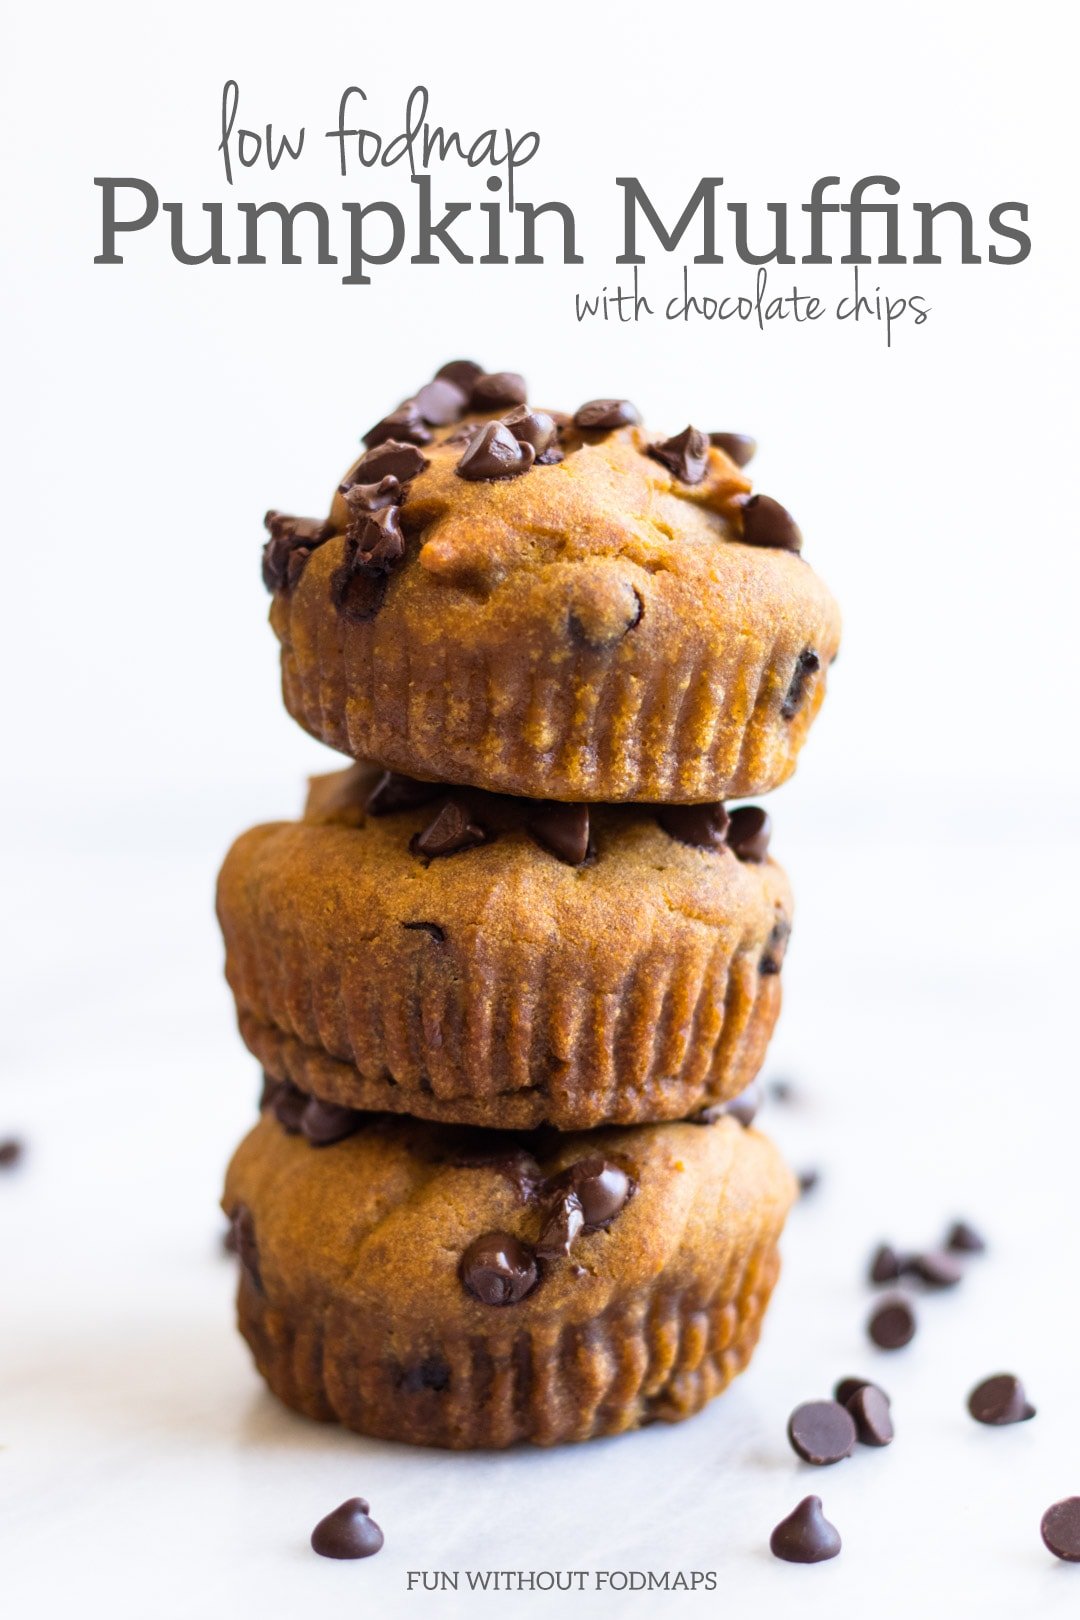 A stack of three low FODMAP pumpkin muffins surrounded by mini chocolate chips. Dark gray text reads "Low FODMAP Pumpkin Muffins with Chocolate Chips" on the white background. 